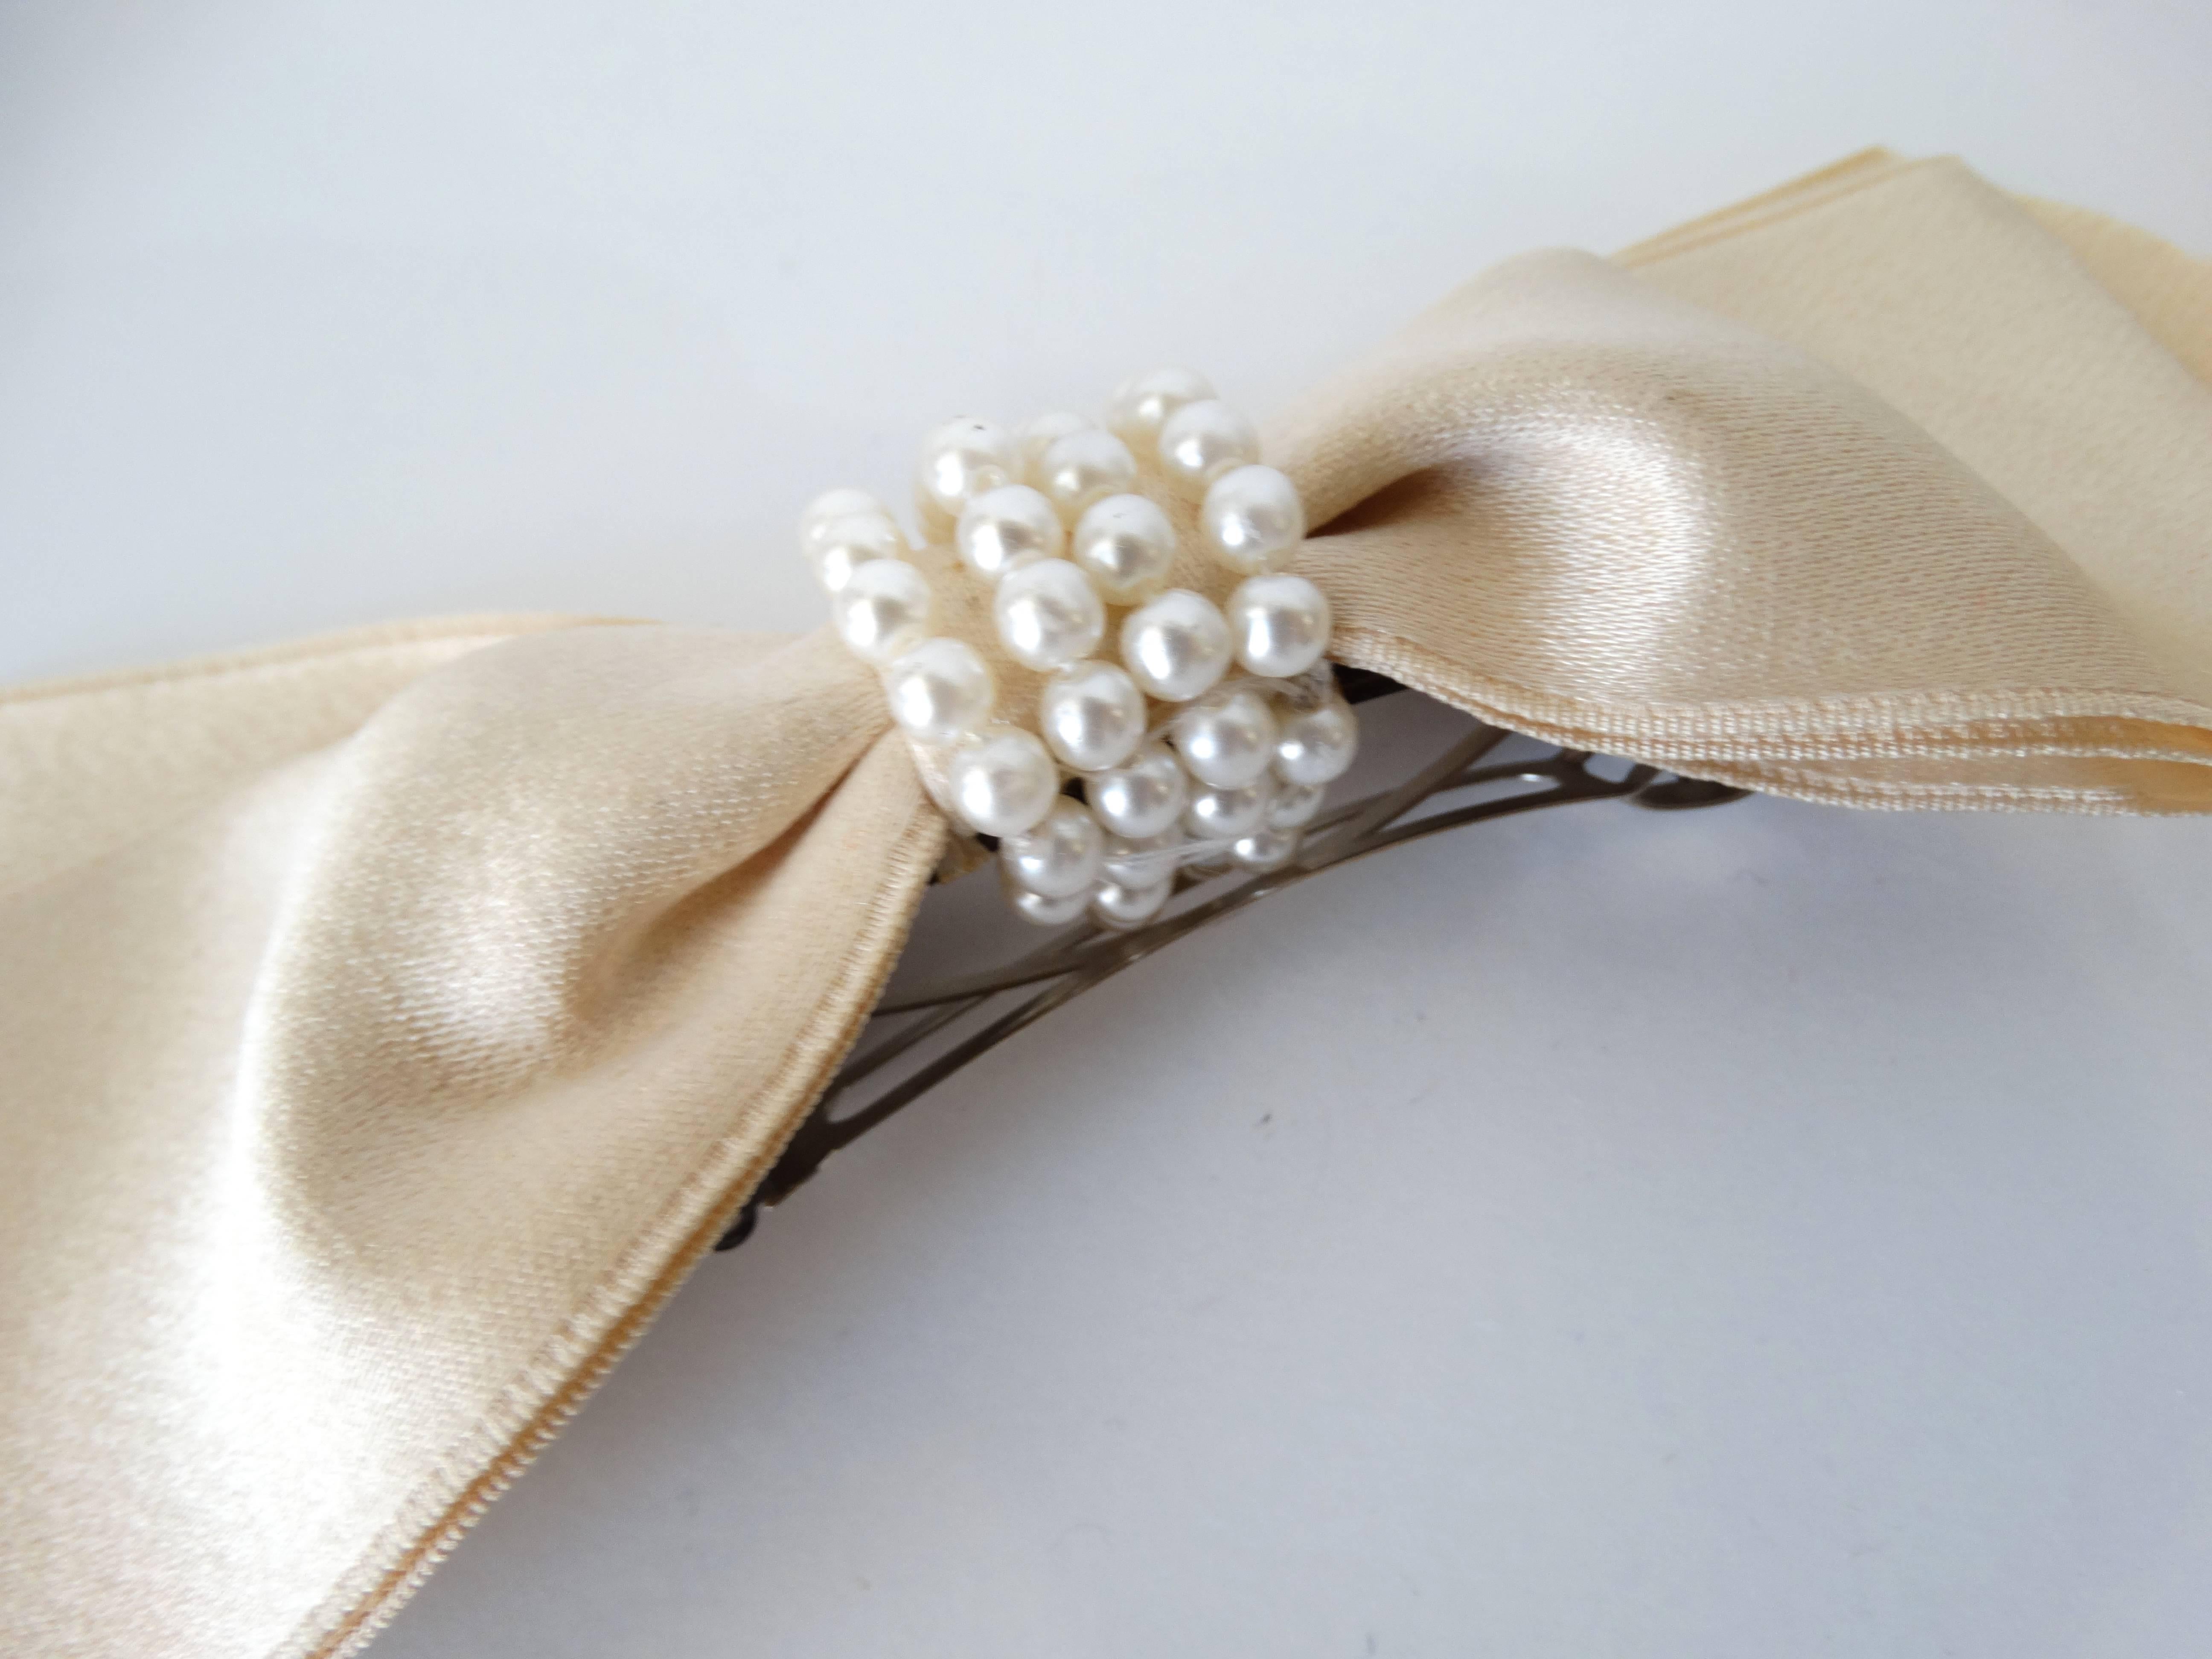 Classic 1980's Chanel Cream Satin Hair Bow with 4 strand Pearl details in the center (the bow is wired to maintain its curved shape) with attached barrette. Sophisticated and demure. 
Chanel signature plate attached. 
Measurements: 
7 inches by 2